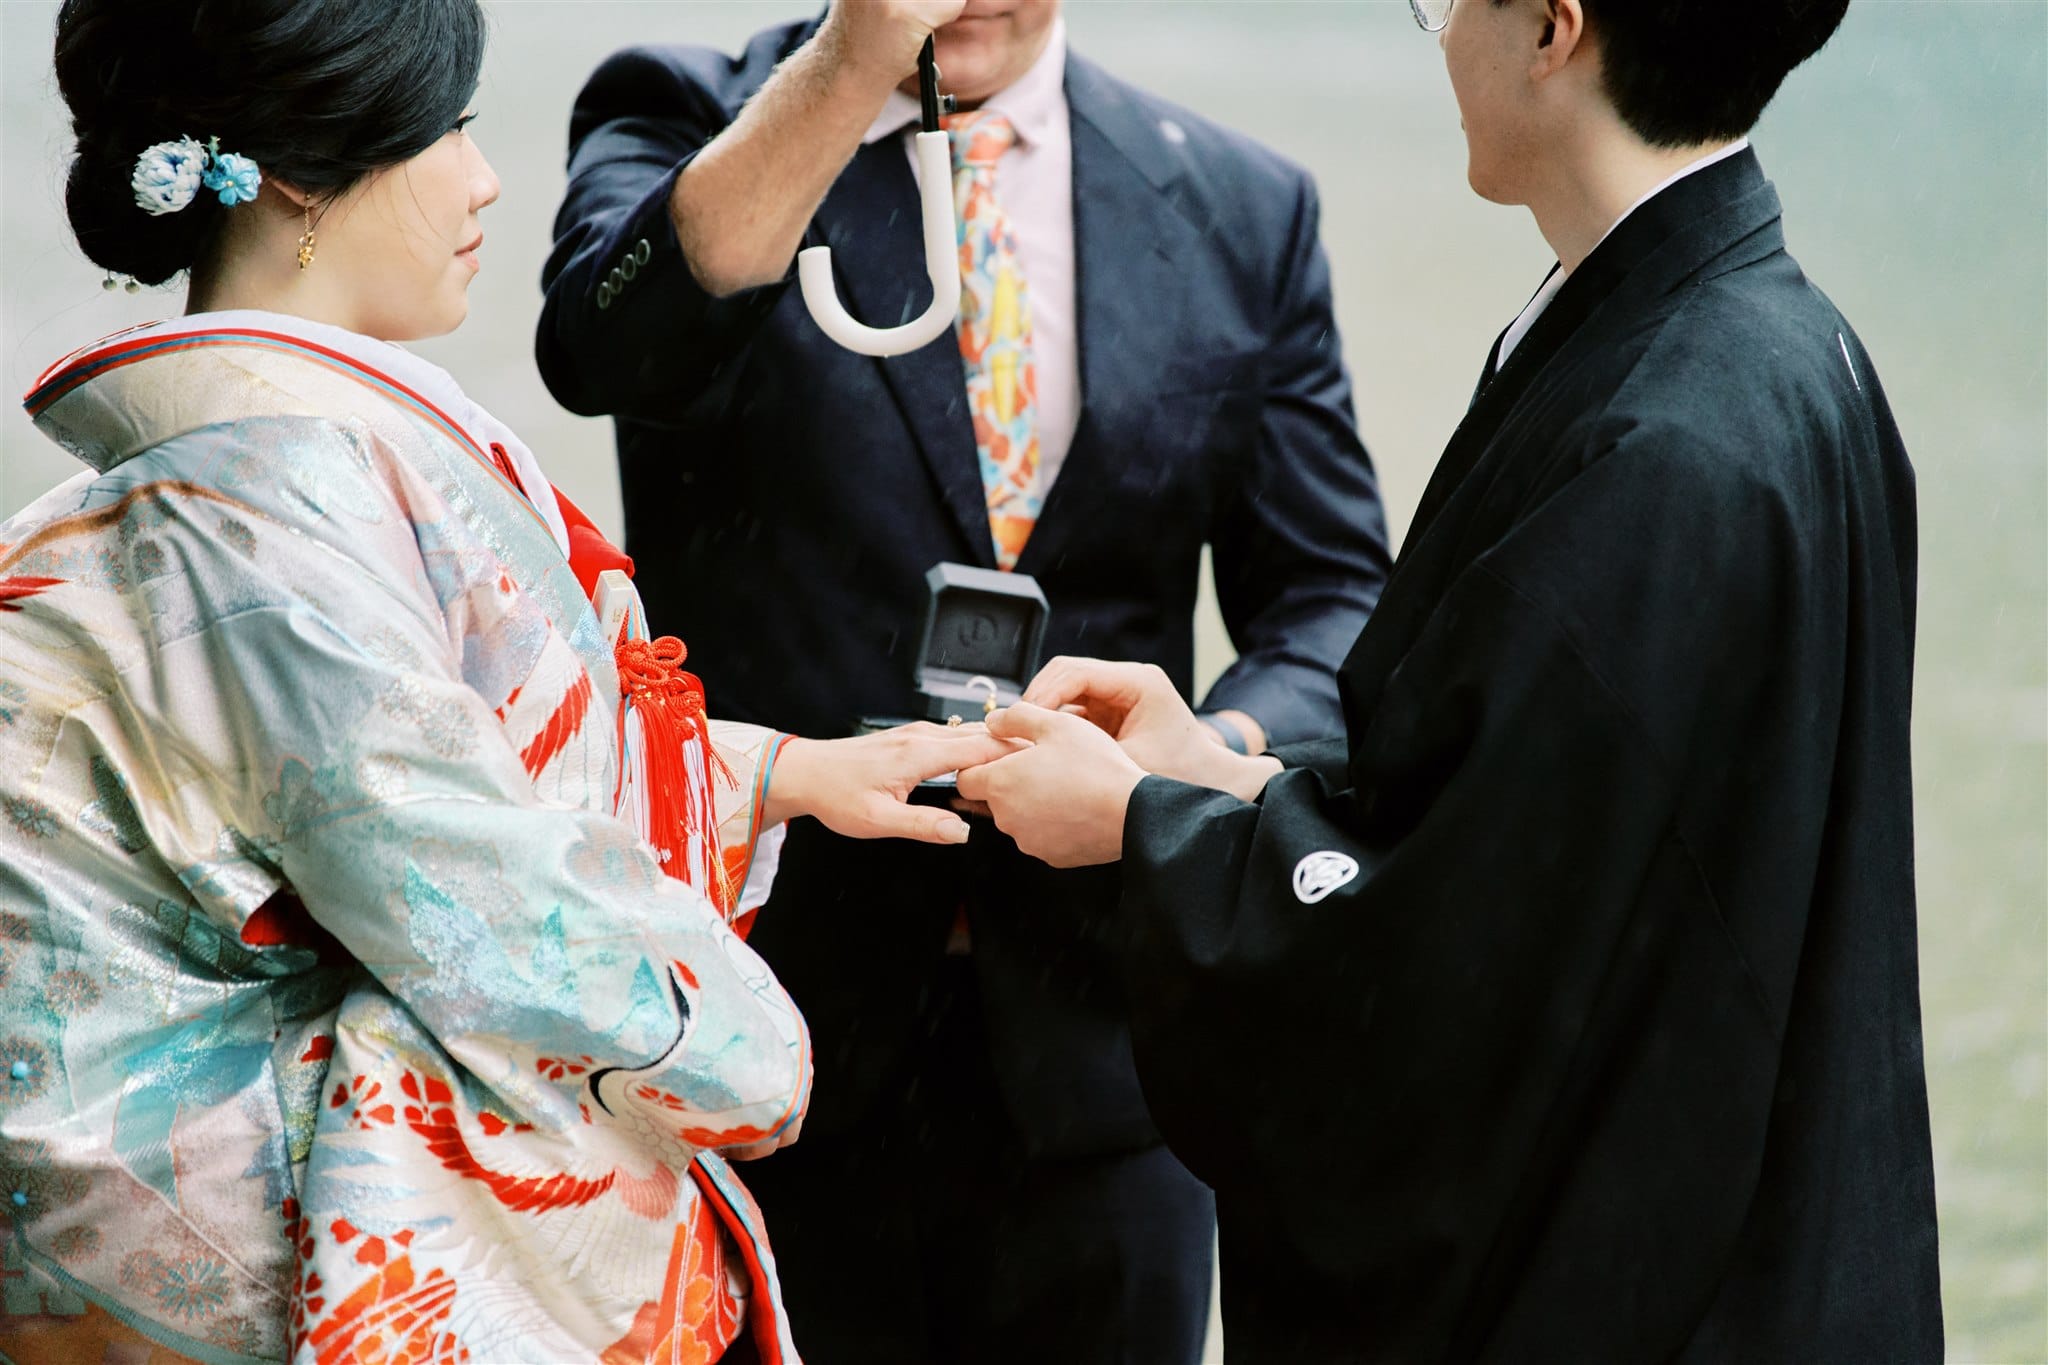 Kyoto Tokyo Japan Elopement Wedding Photographer, Planner & Videographer | An elopement photographer captures the moment a man delicately places a ring on a woman's finger.